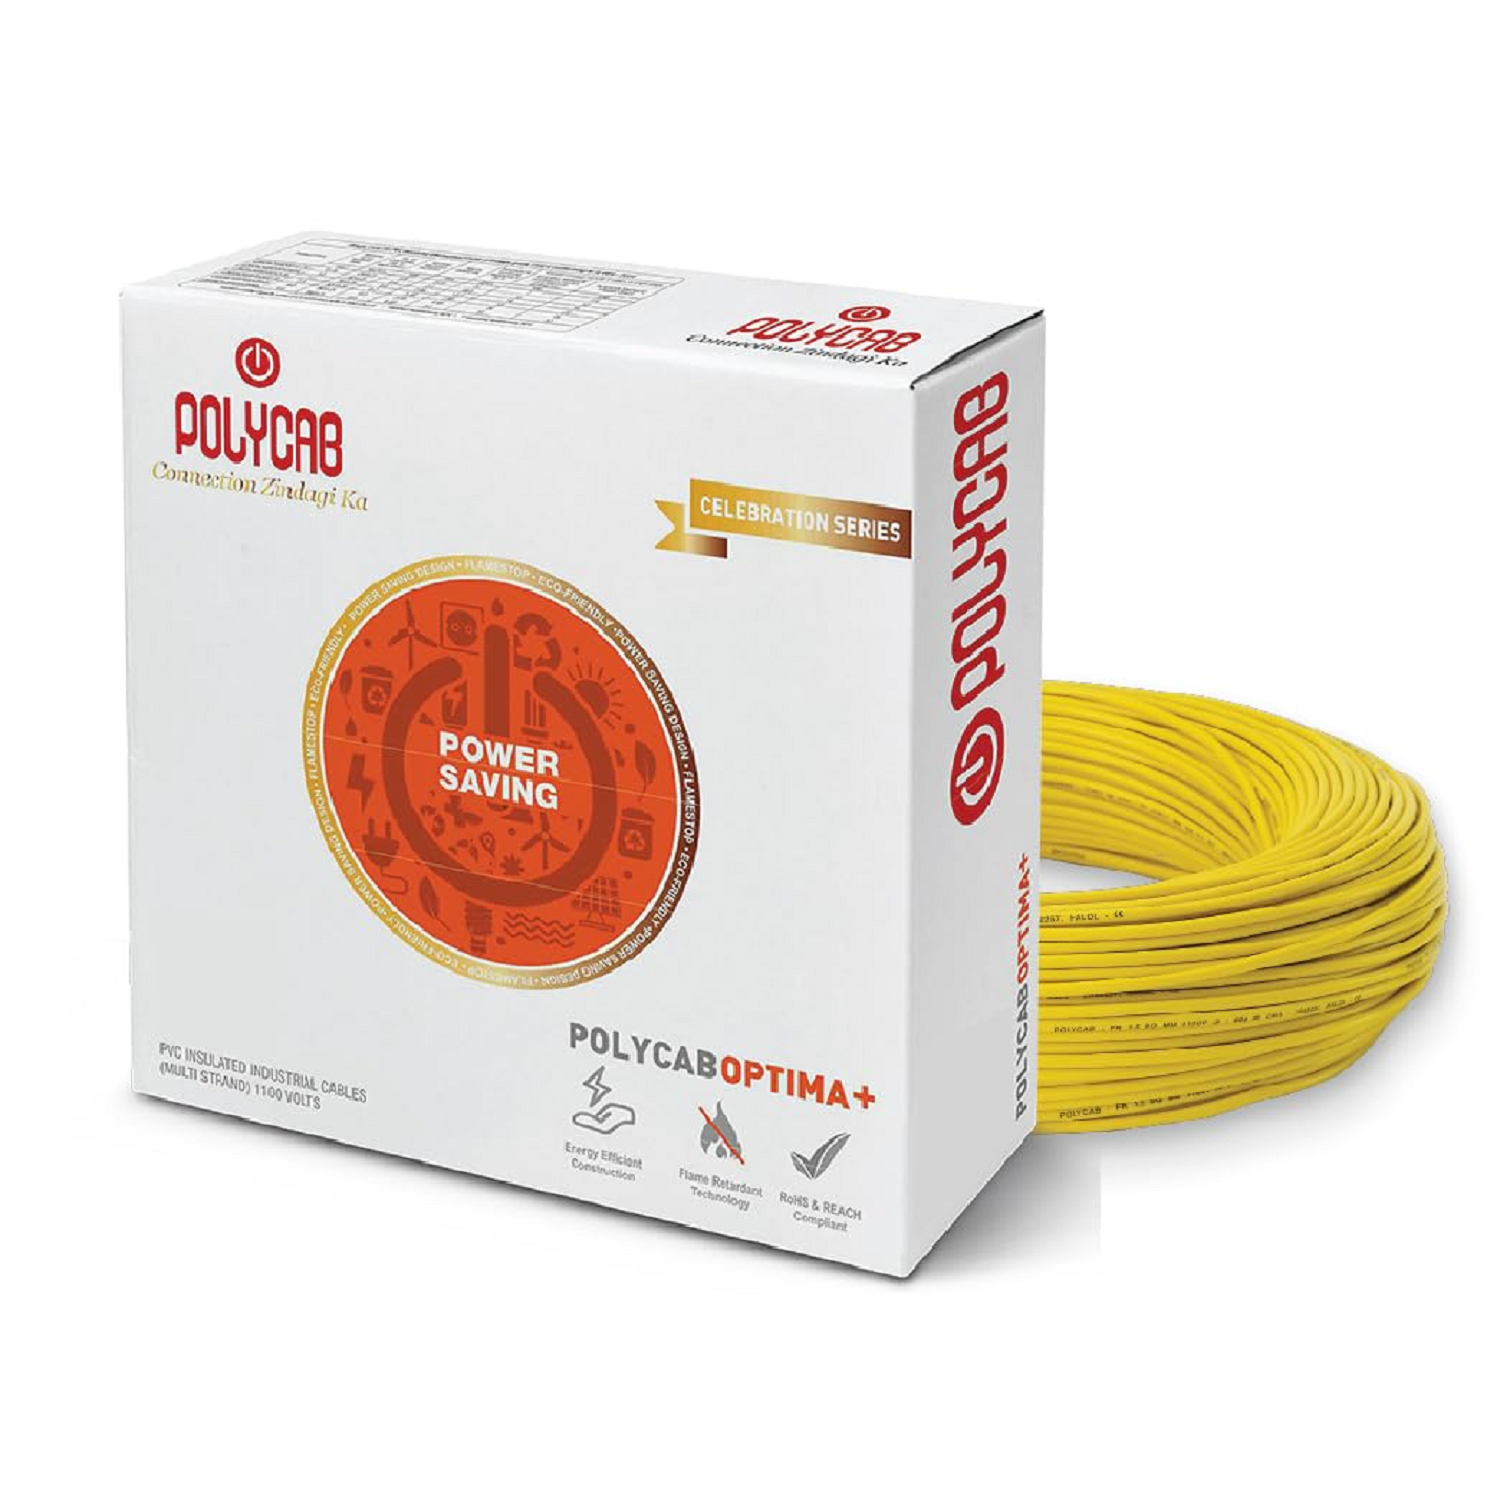 Polycab Optima Plus FR-LF 2.5 SQ-MM, 90 Meters PVC Insulated Copper Wire Single Core (Yellow)